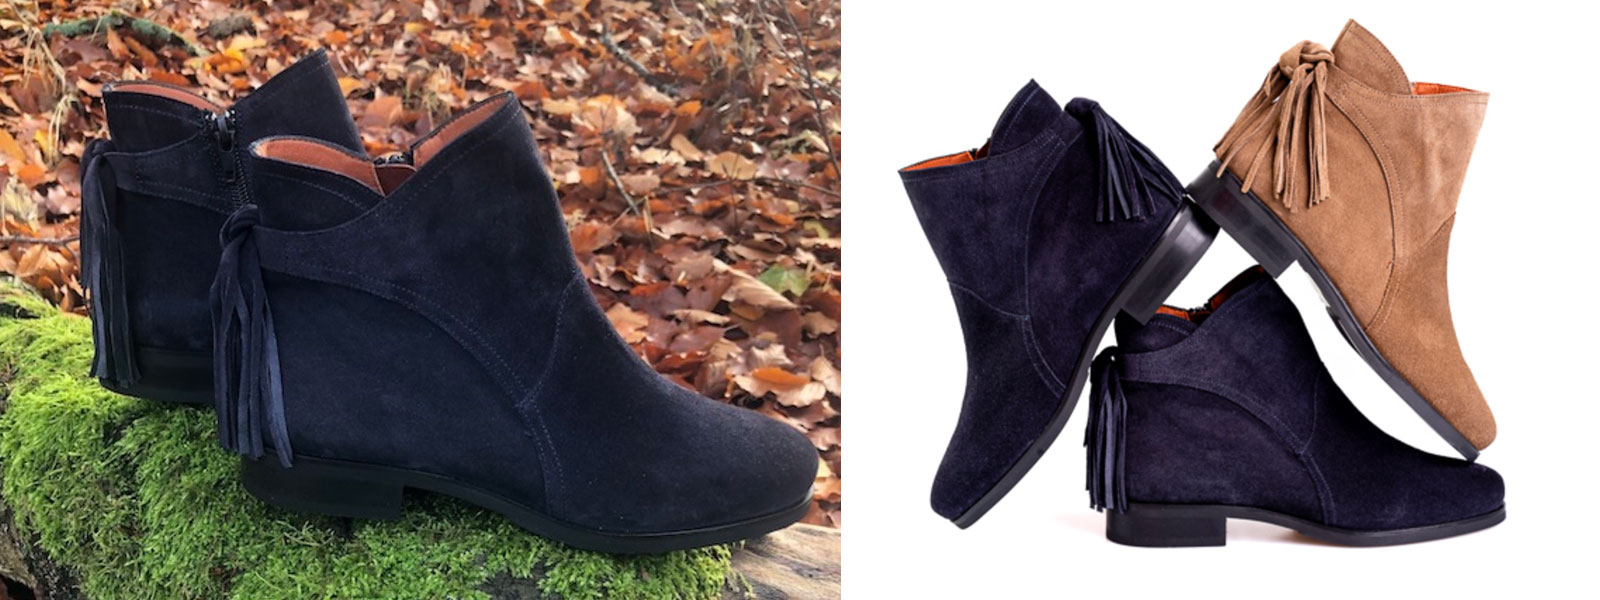 Navy Suede Boots